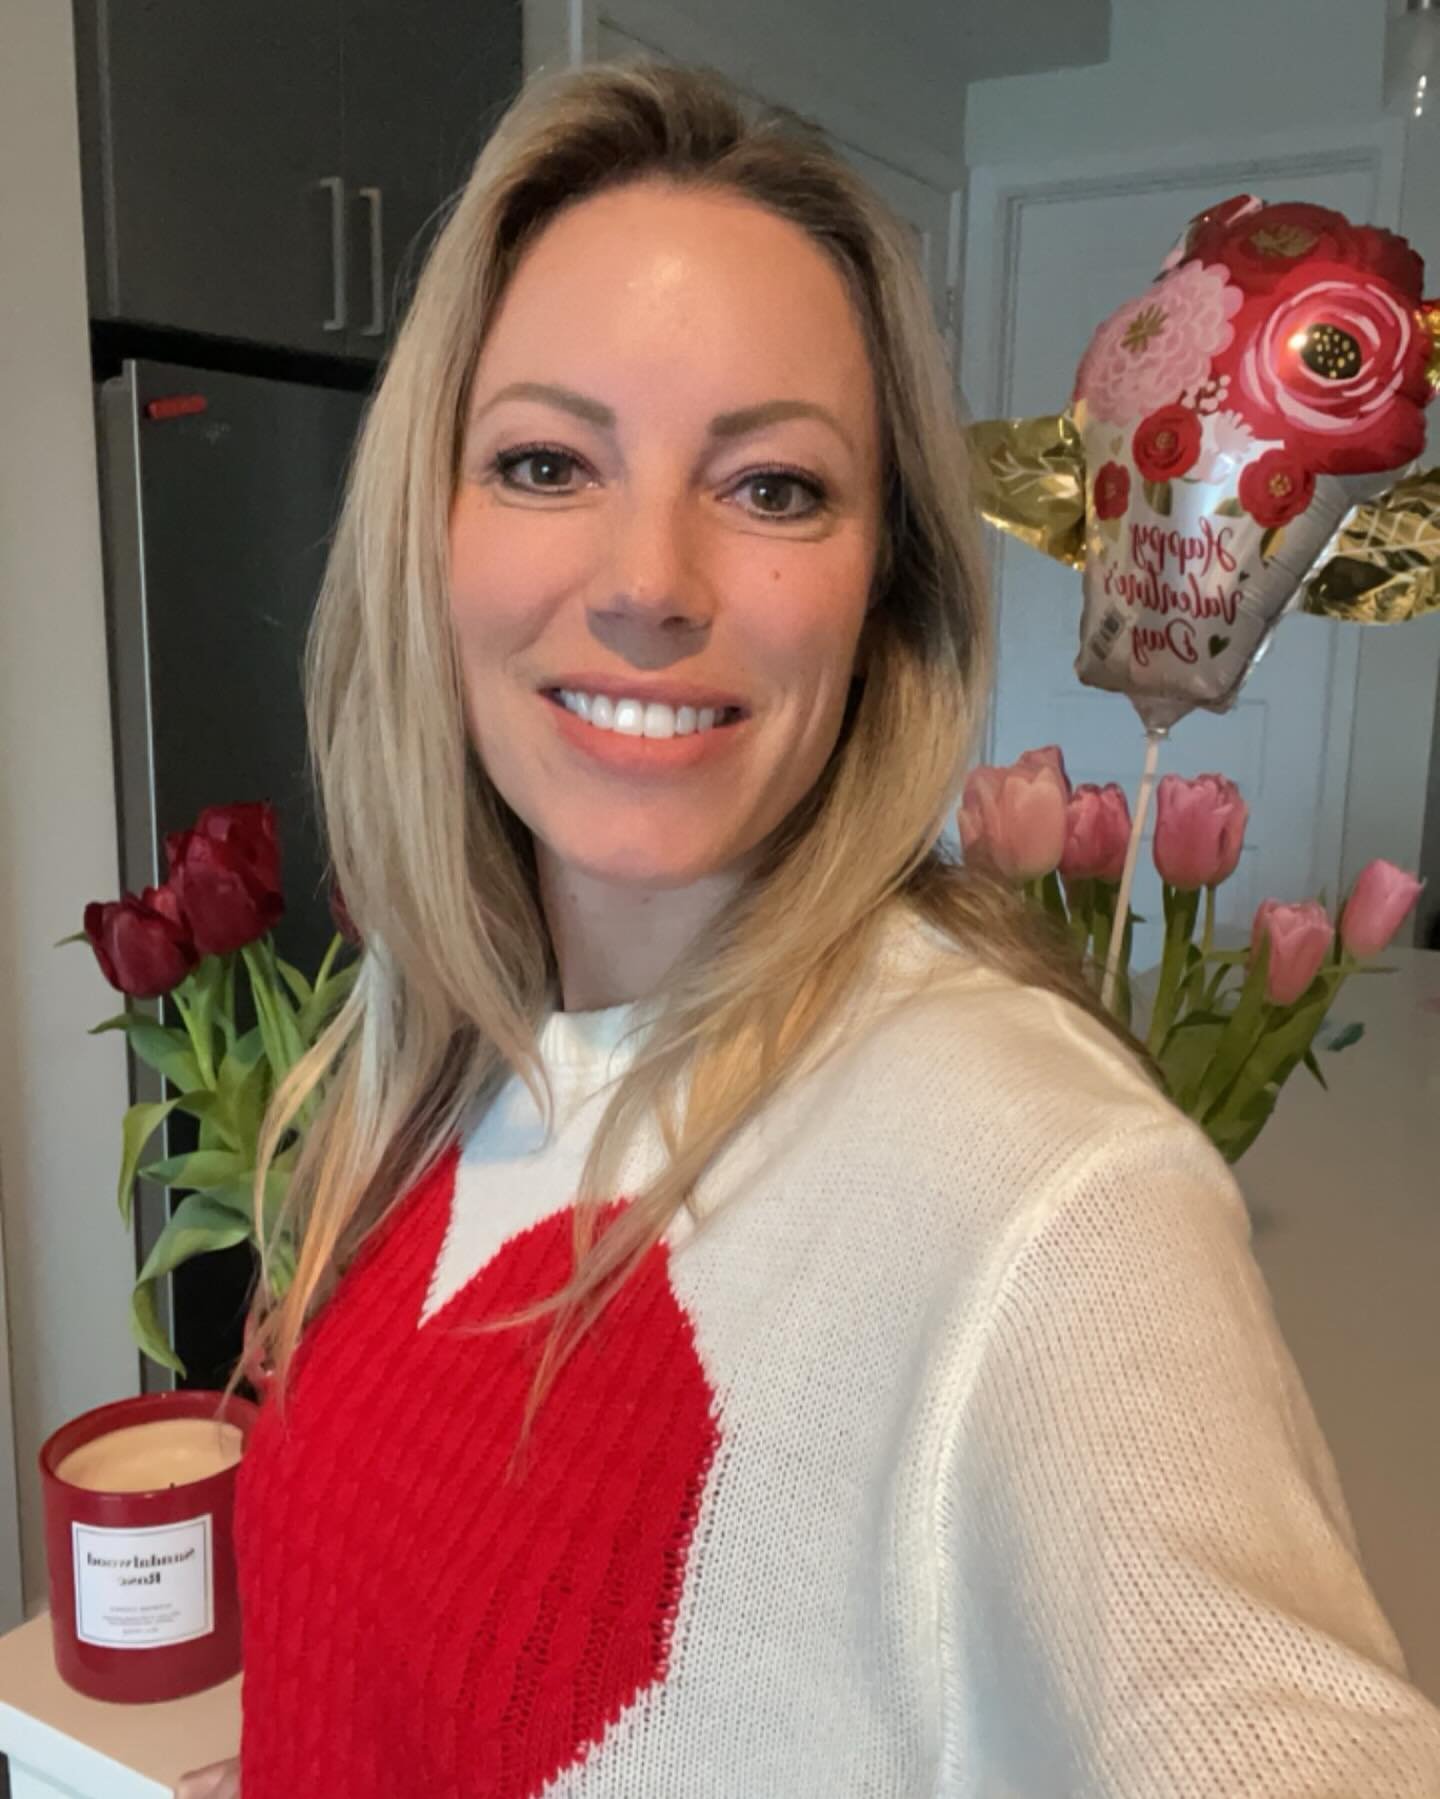 I hope ya&rsquo;ll had a lovely Valentine&rsquo;s Day! 😍 I sure did! Enjoying sporting this heart ❤️ sweater from @shopapt22 in honour of Love Day too! 💌 ❌⭕️